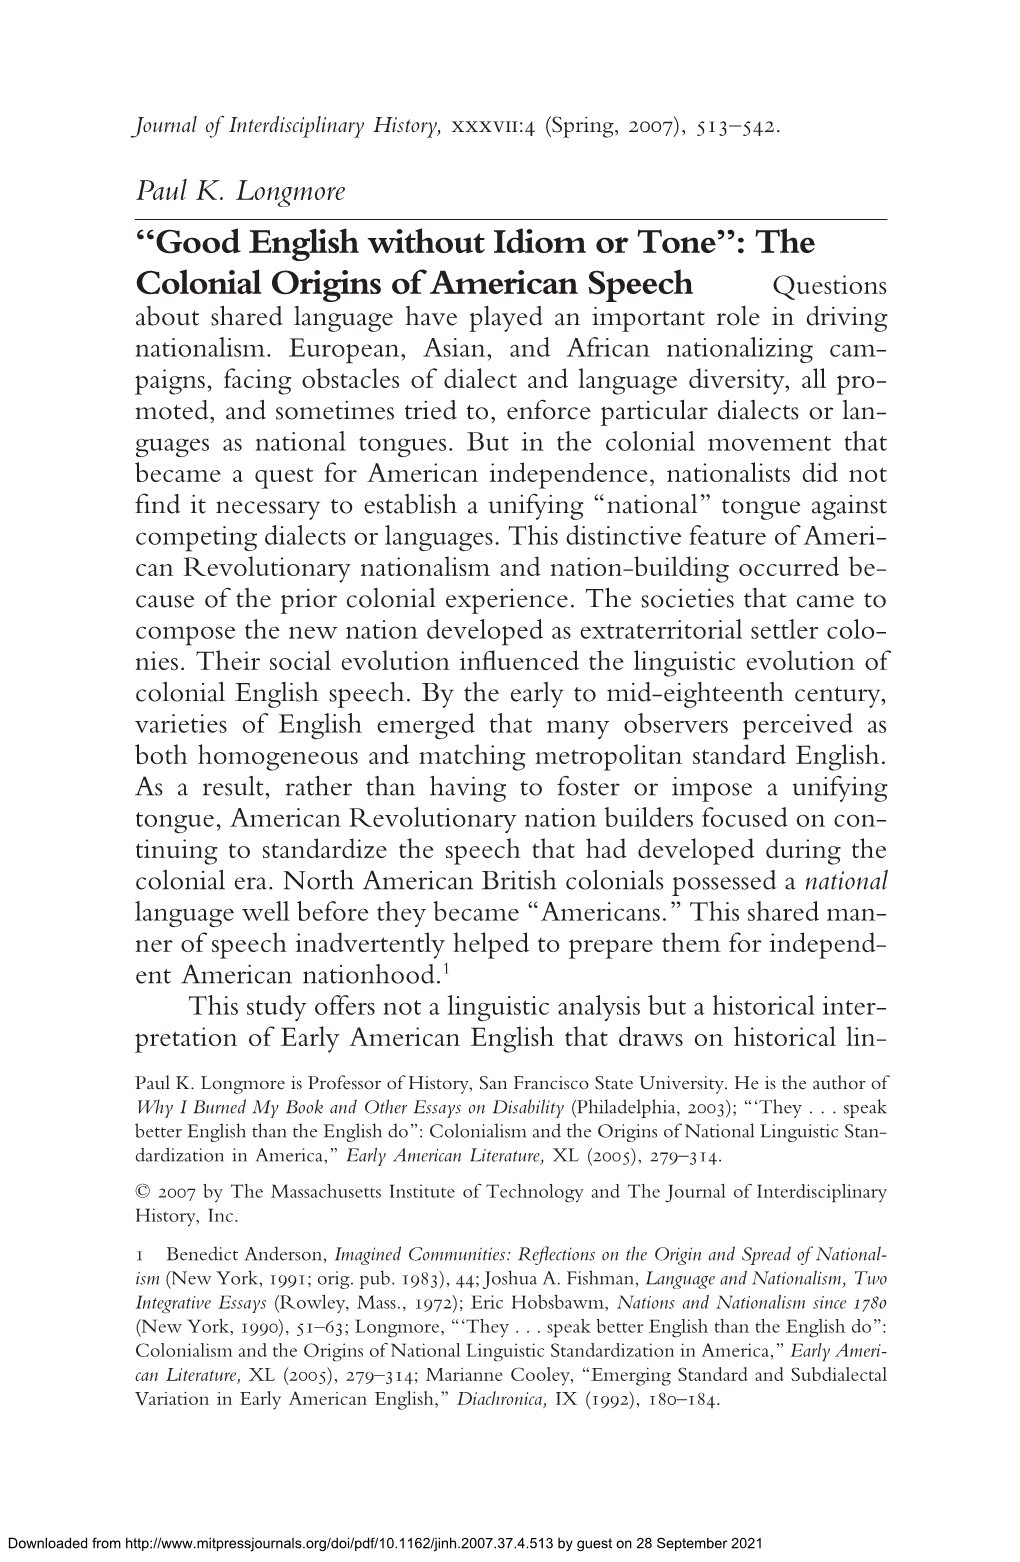 “Good English Without Idiom Or Tone”: the Colonial Origins of American Speech Questions About Shared Language Have Played an Important Role in Driving Nationalism